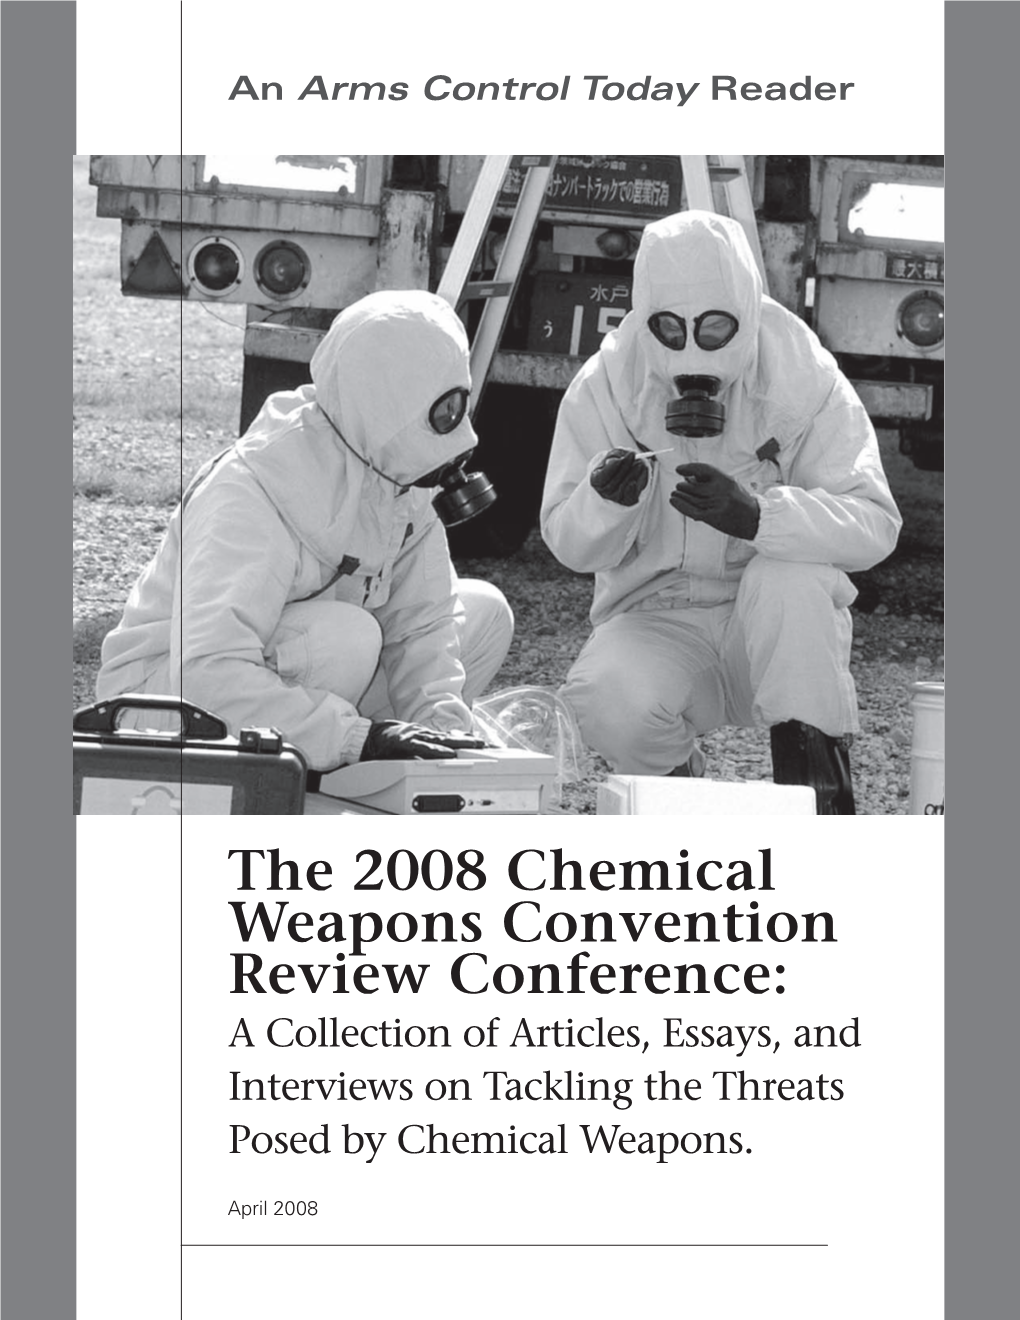 The 2008 Chemical Weapons Convention Review Conference: a Collection of Articles, Essays, and Interviews on Tackling the Threats Posed by Chemical Weapons